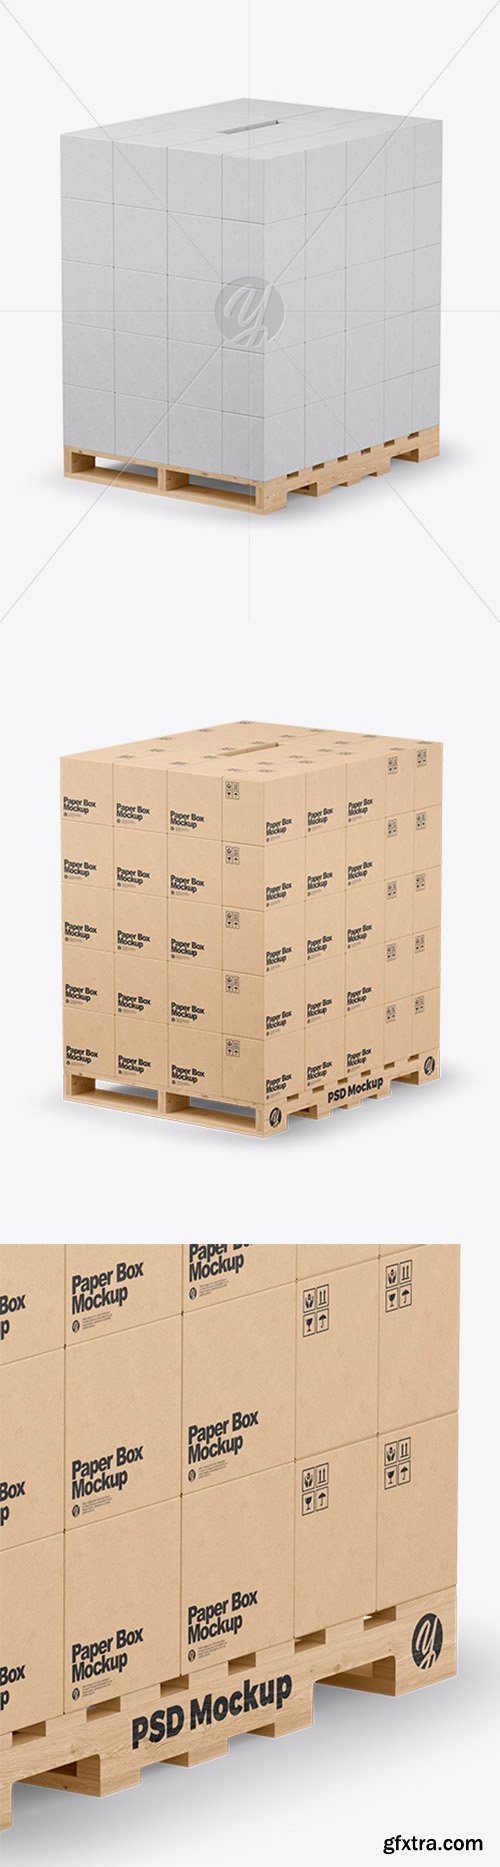 Wooden Pallet With Kraft Boxes Mockup 52222